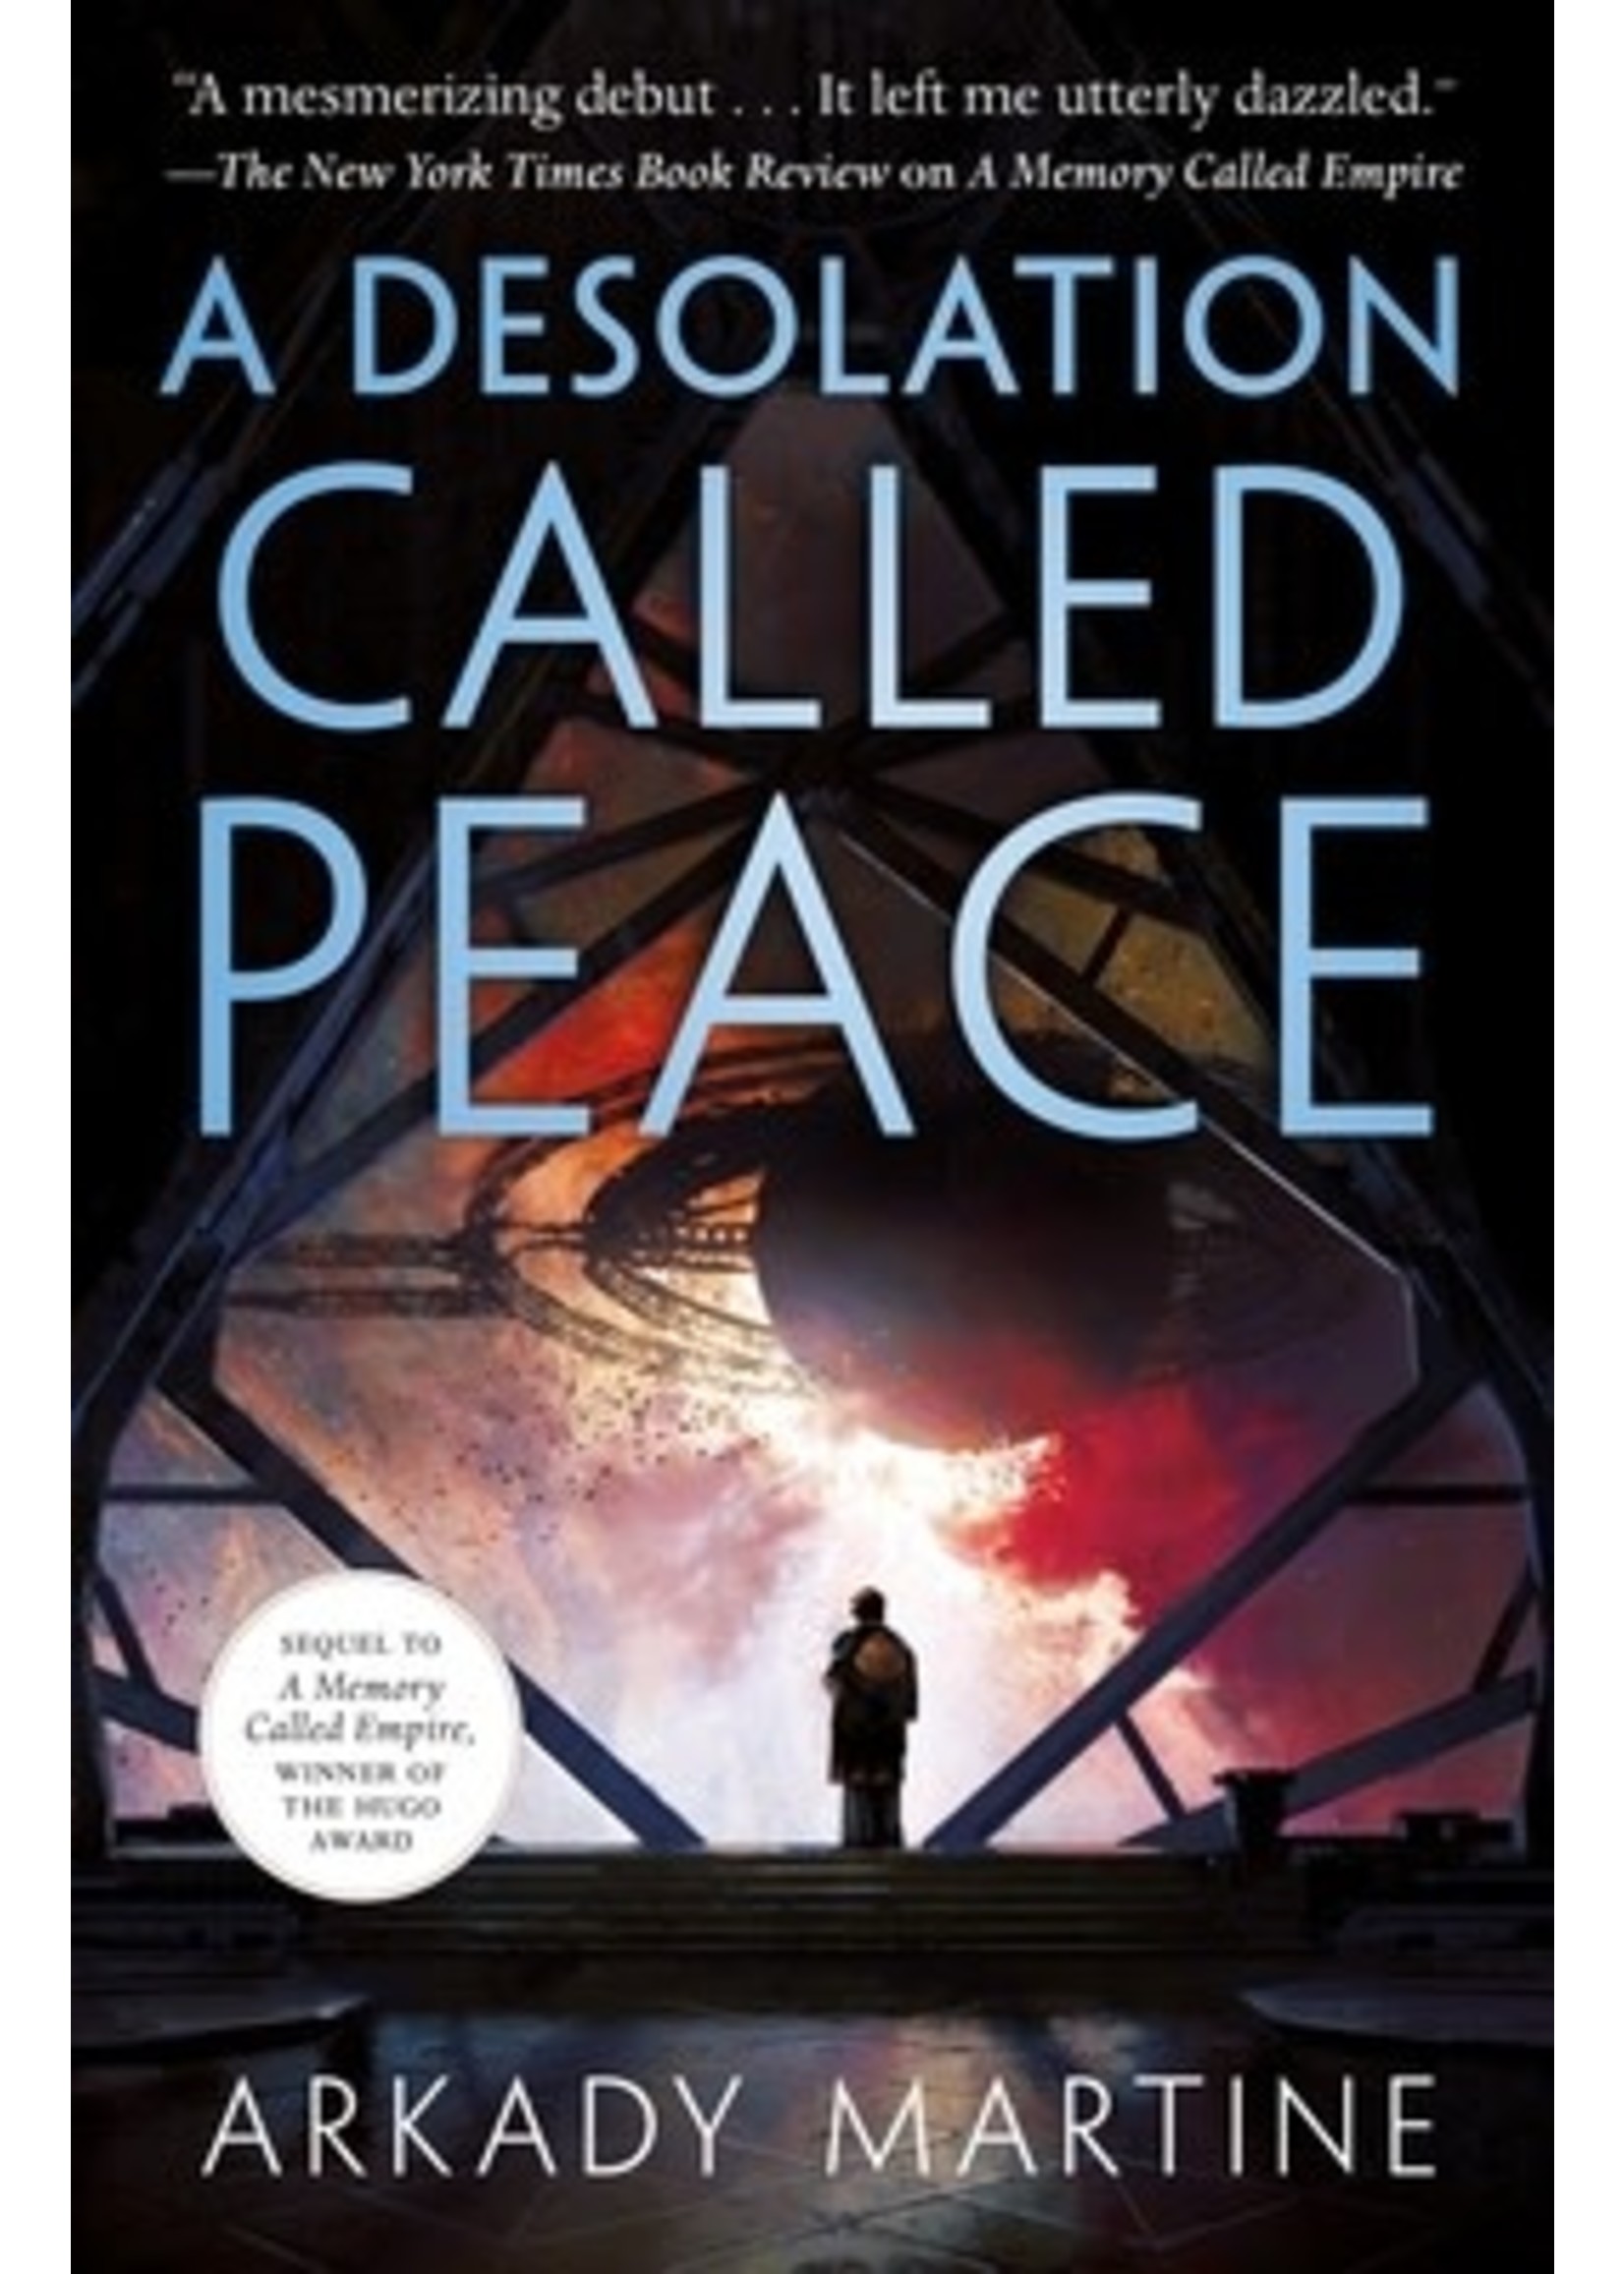 A Desolation Called Peace (Teixcalaan #2) by Arkady Martine